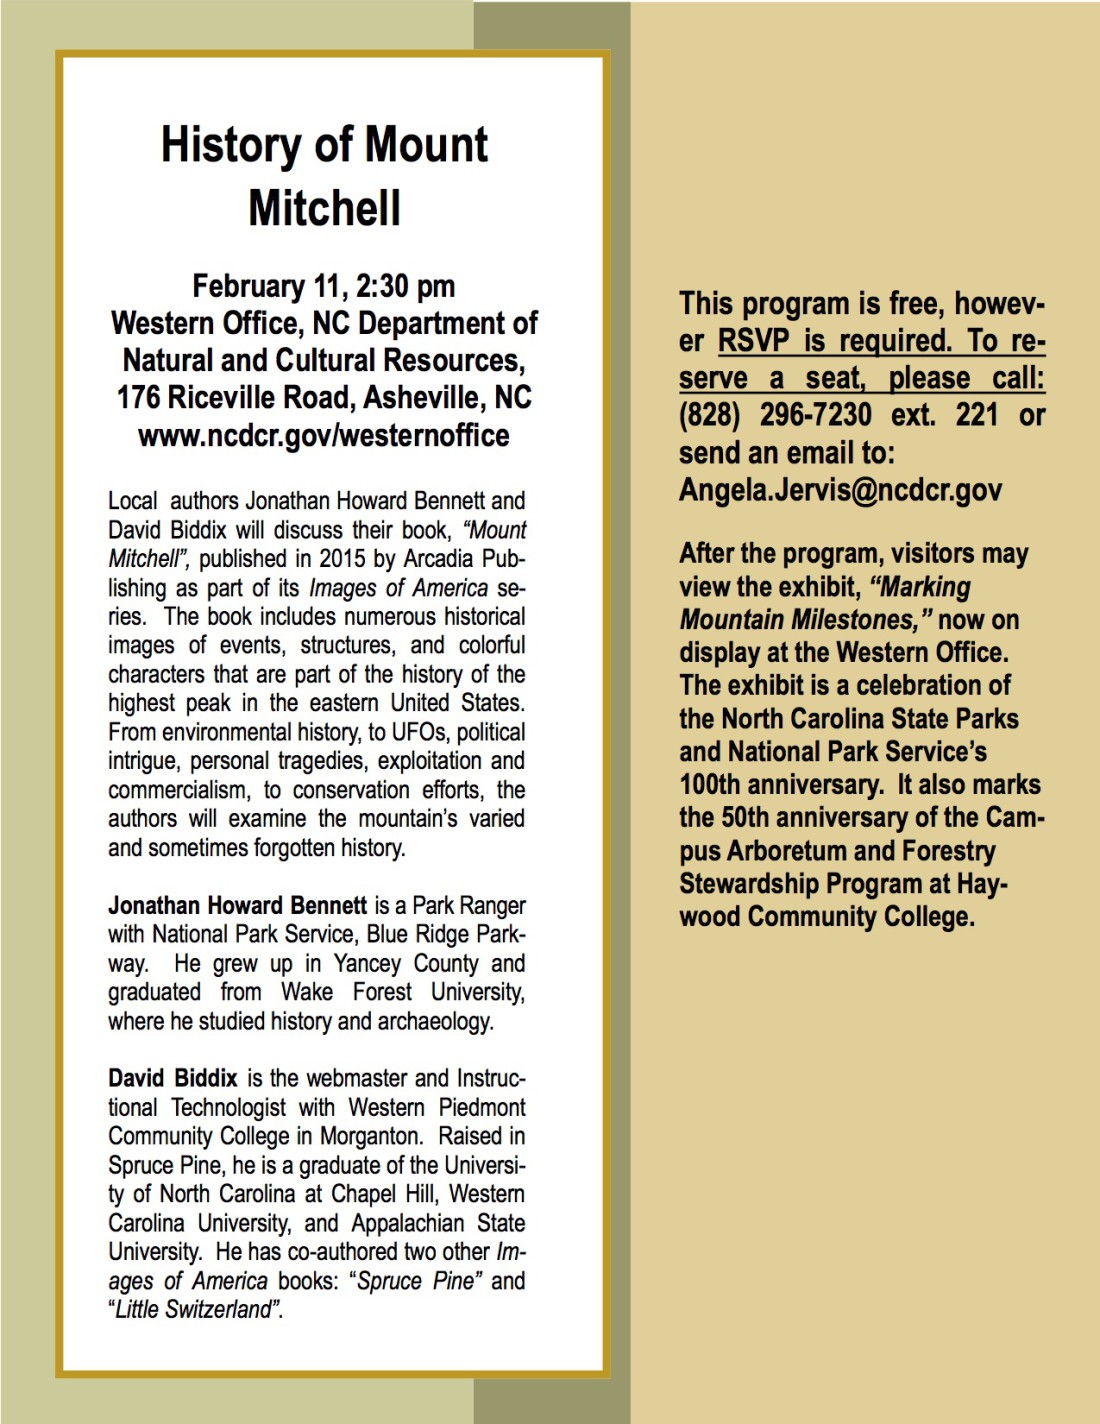 History of Mount Mitchell flyer